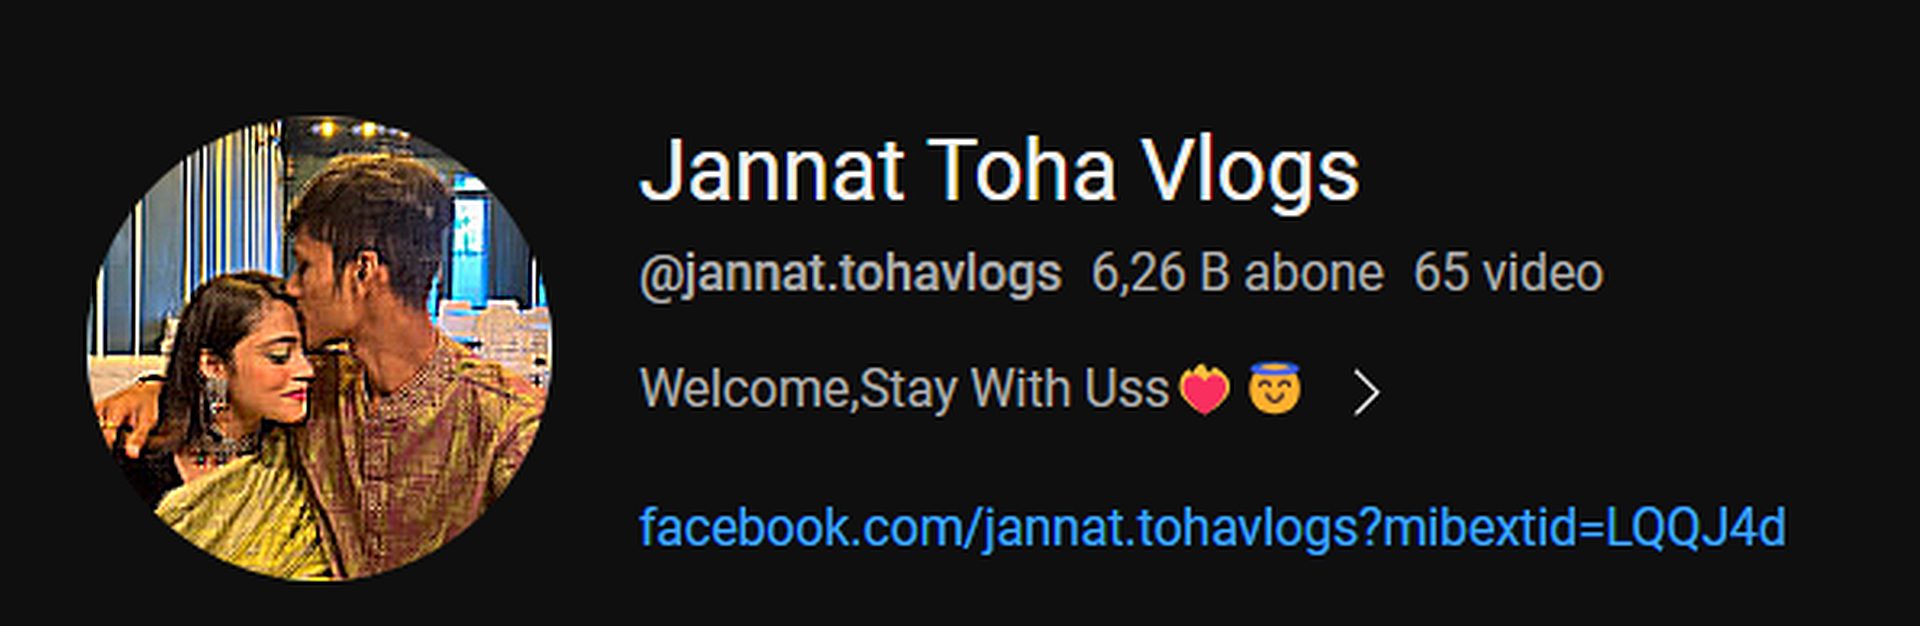 Dive into the Jannat Toha viral video controversy: Privacy, ethics, and online fame. Explore the impact of a leaked video on a YouTube star.